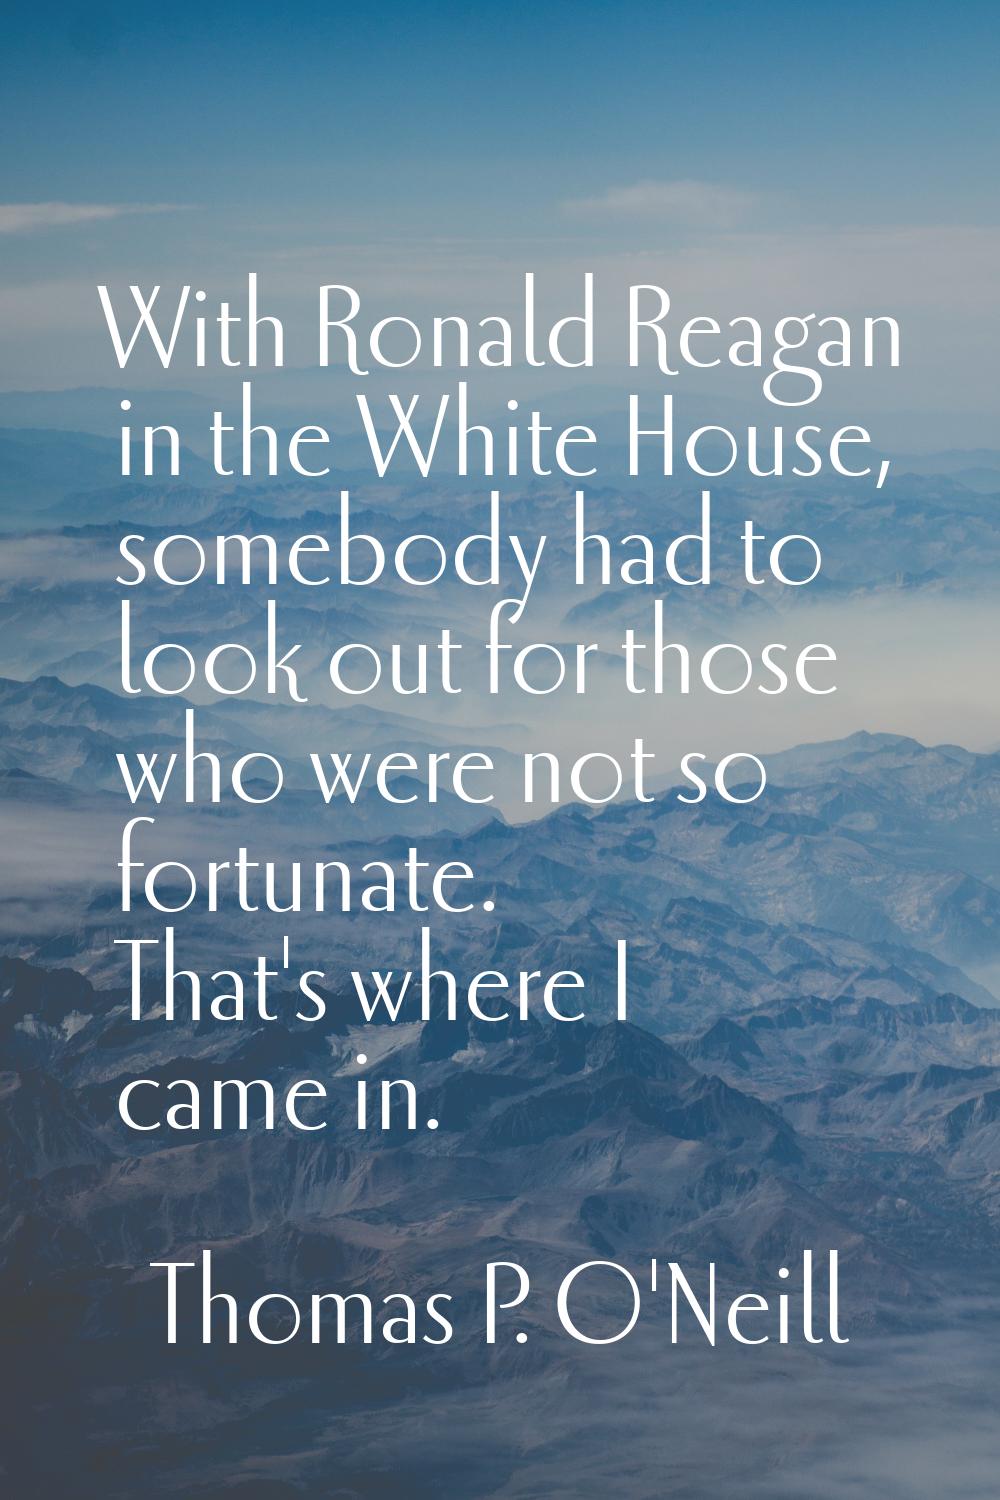 With Ronald Reagan in the White House, somebody had to look out for those who were not so fortunate